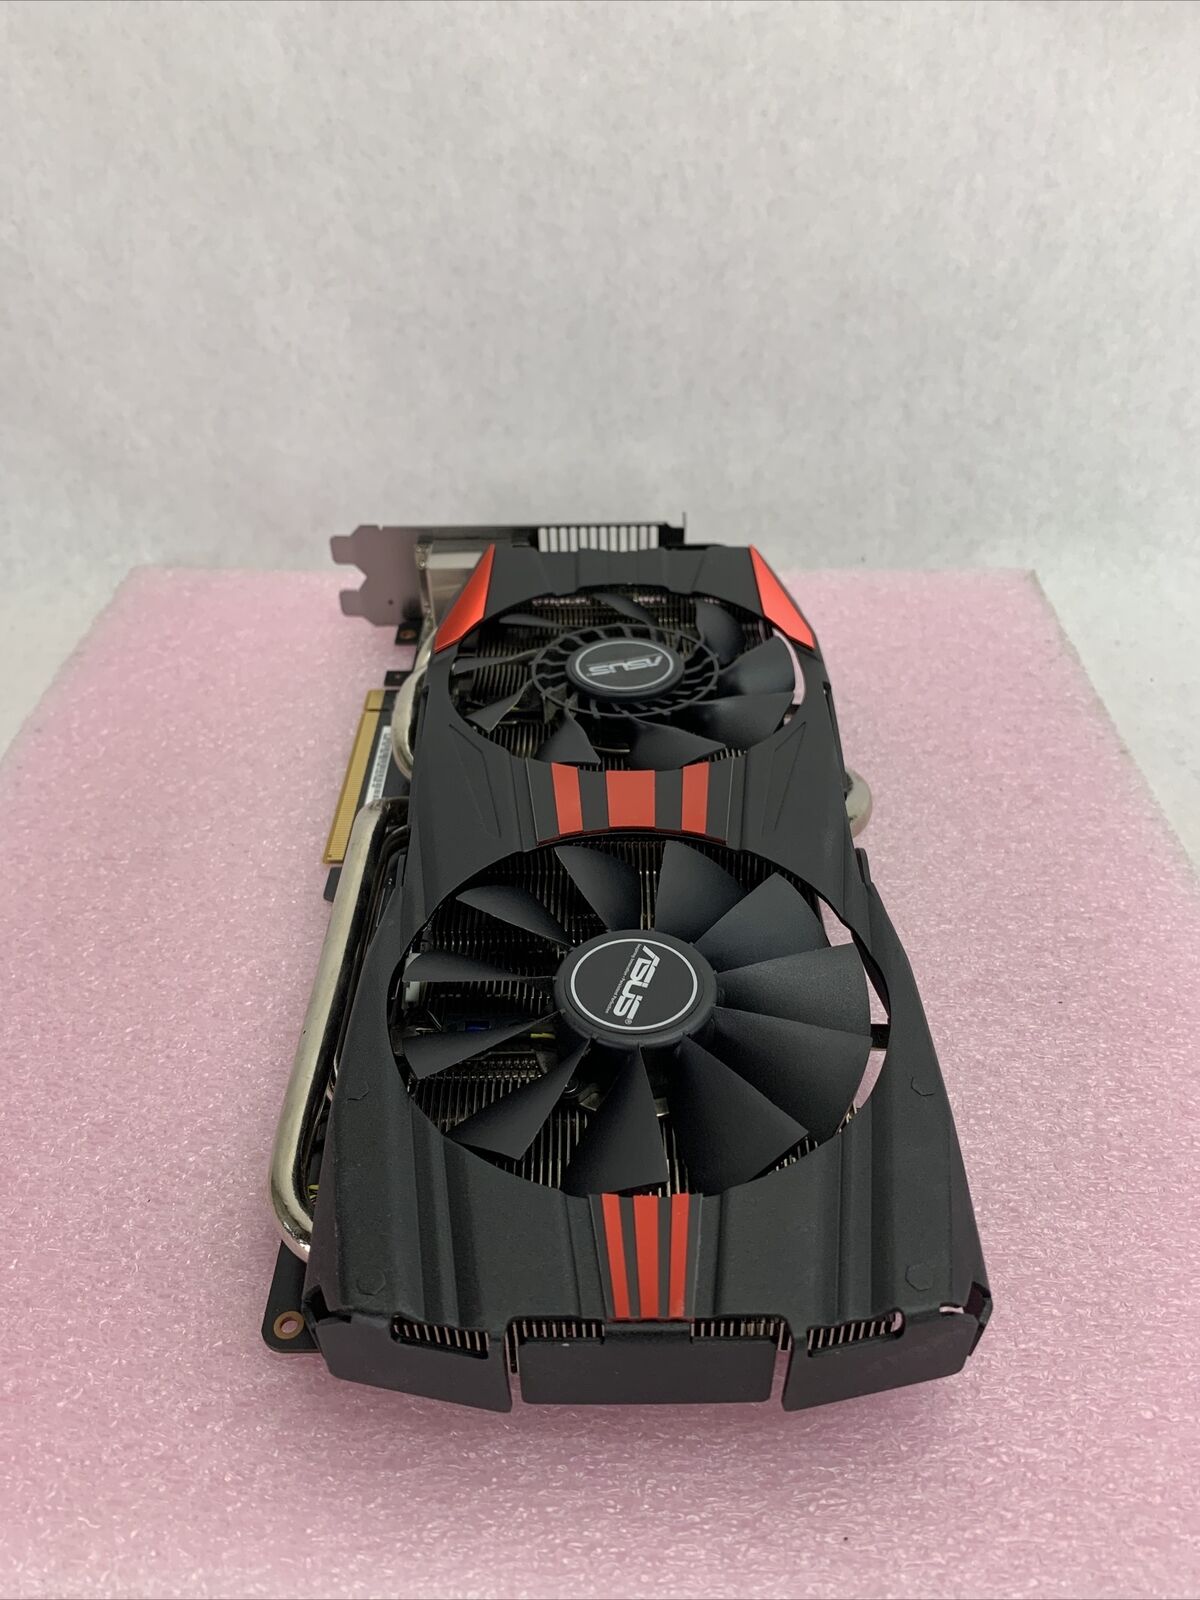 Asus R9280X-DC2T-3GD5 Graphics Card